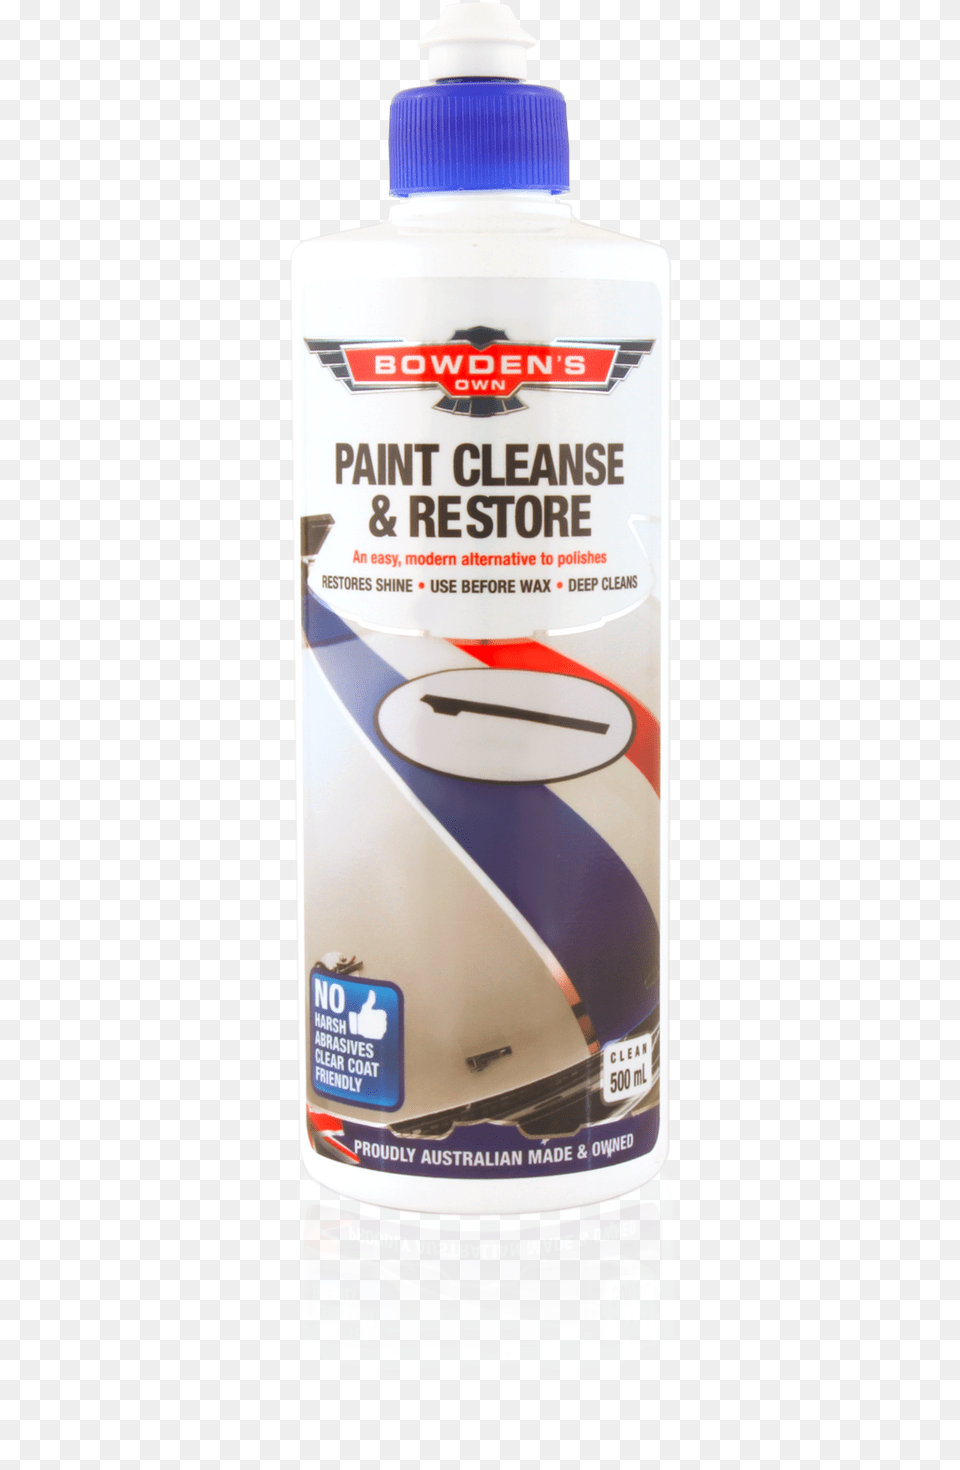 Bowdens Paint Cleanse And Restore, Bottle, Shaker Png